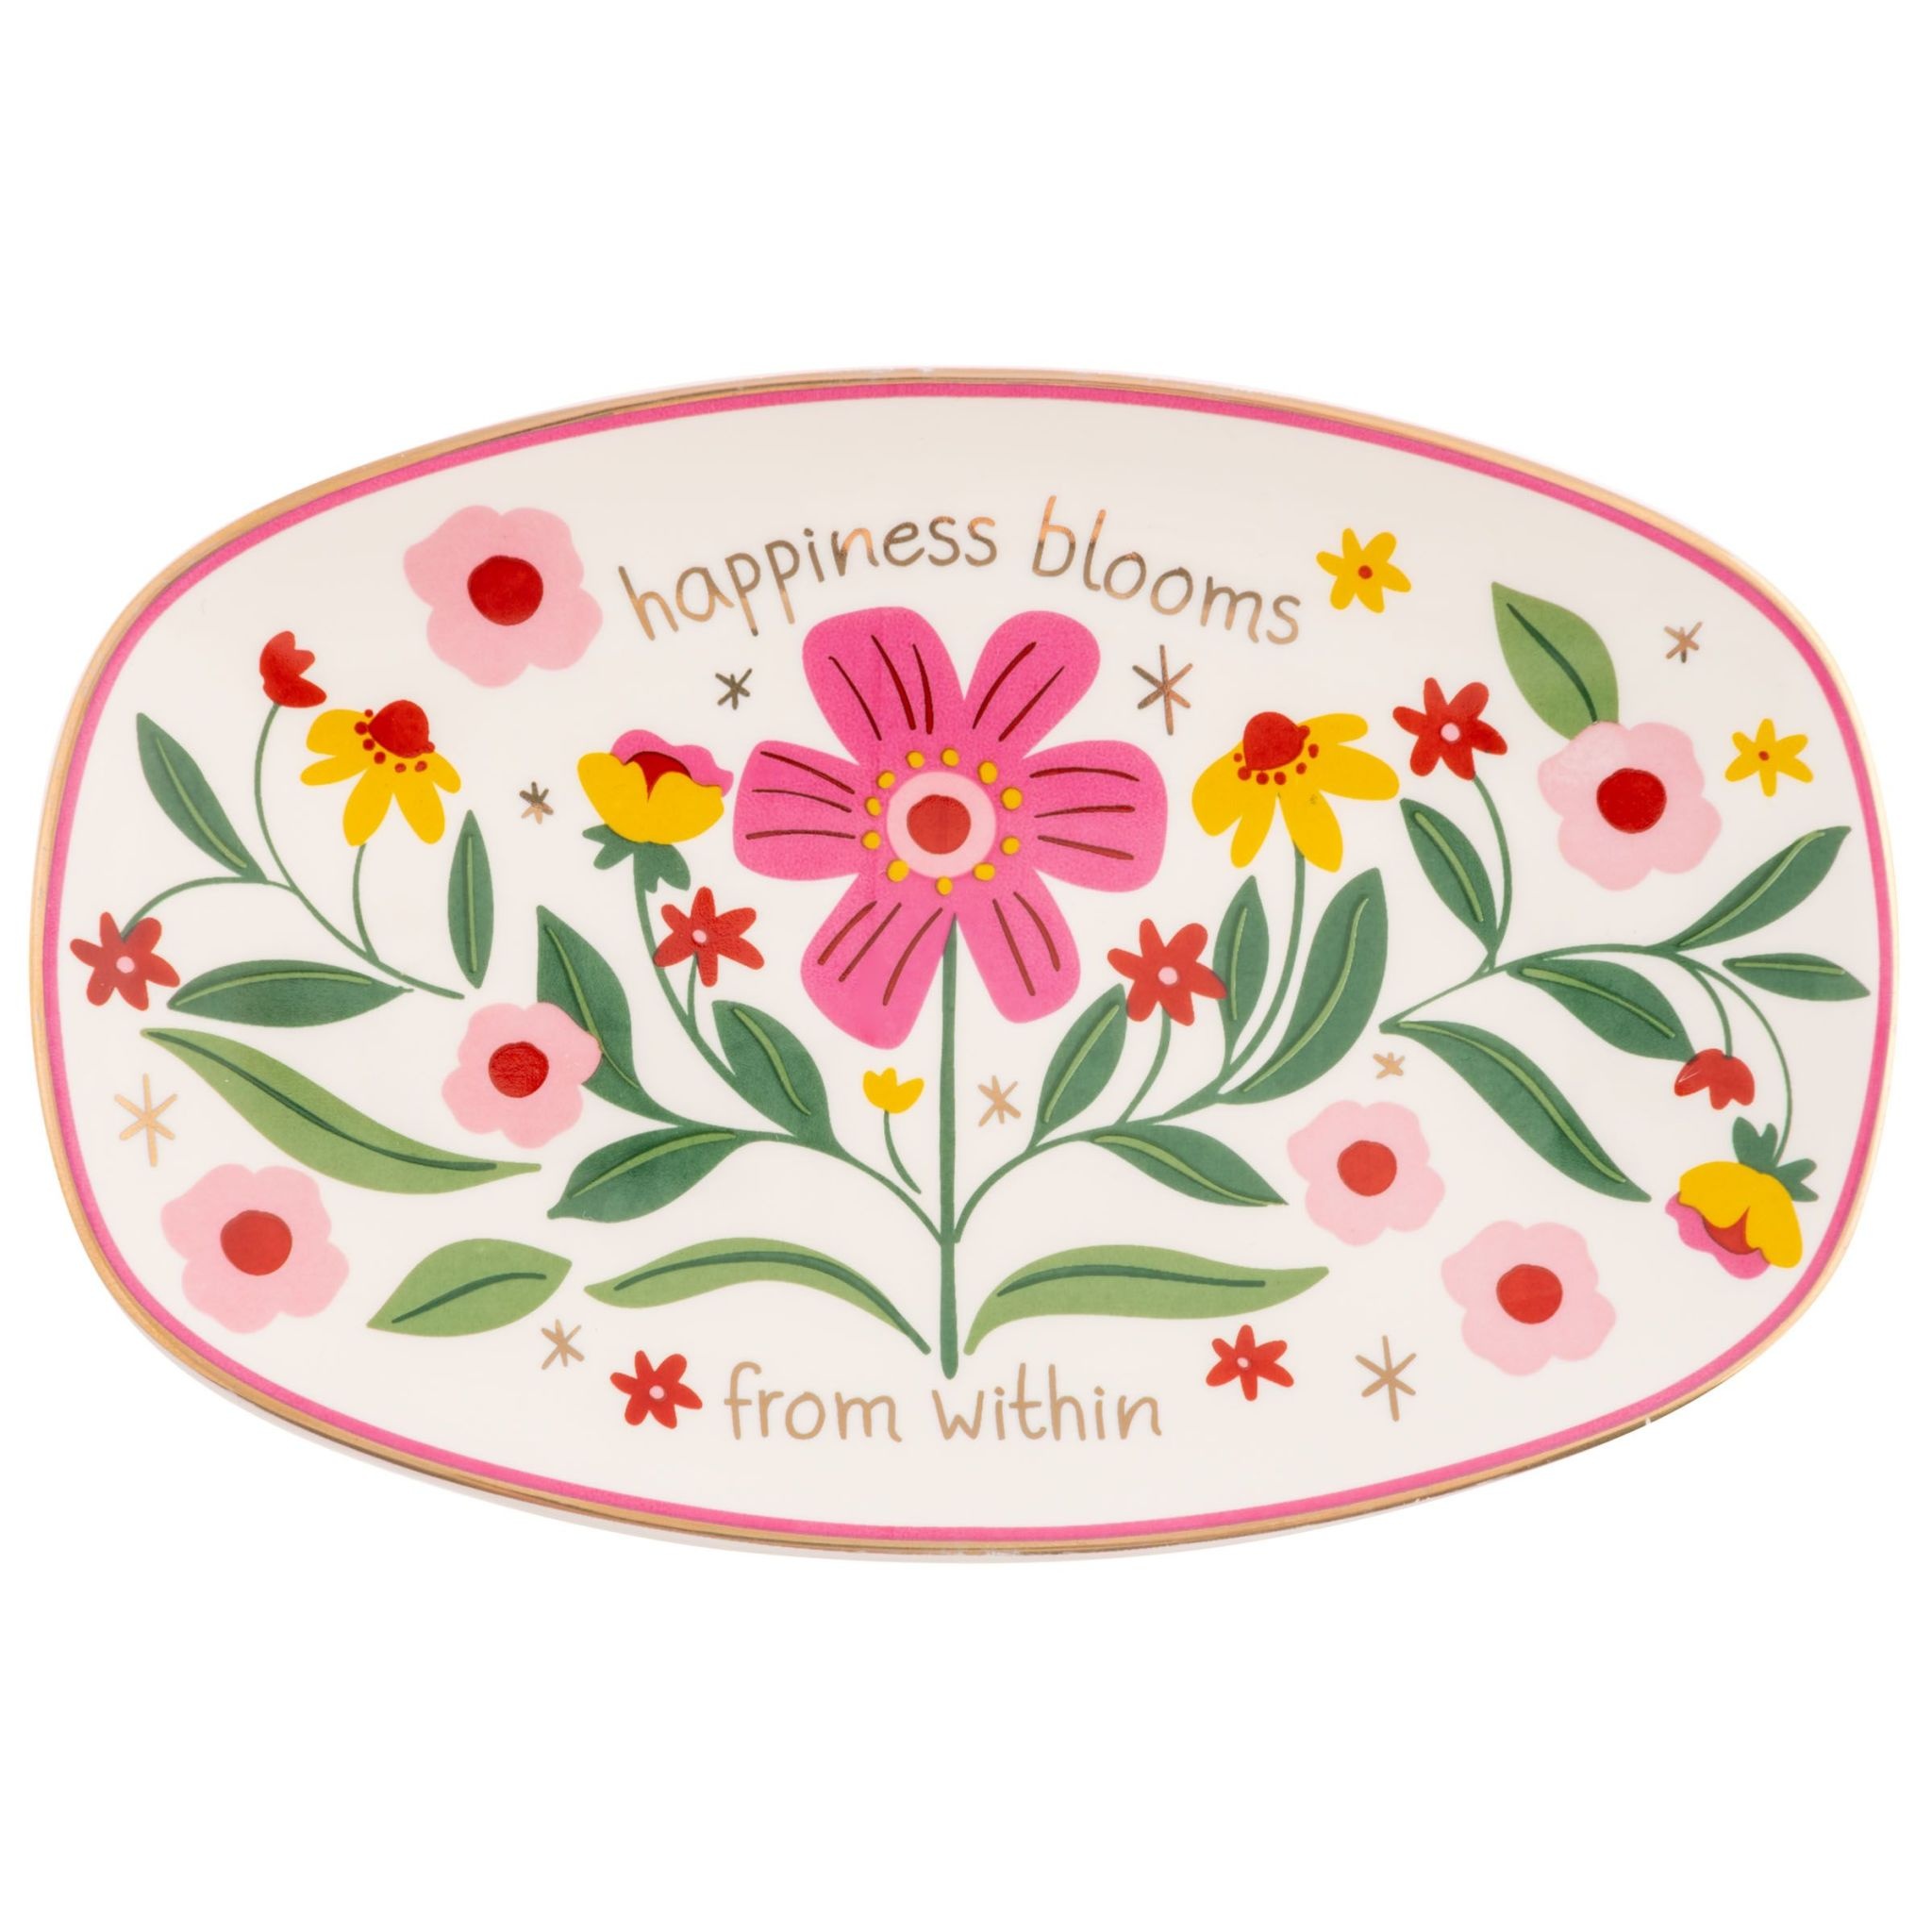 available at m. lynne designs Oval Happiness Blooms Trinket Dish